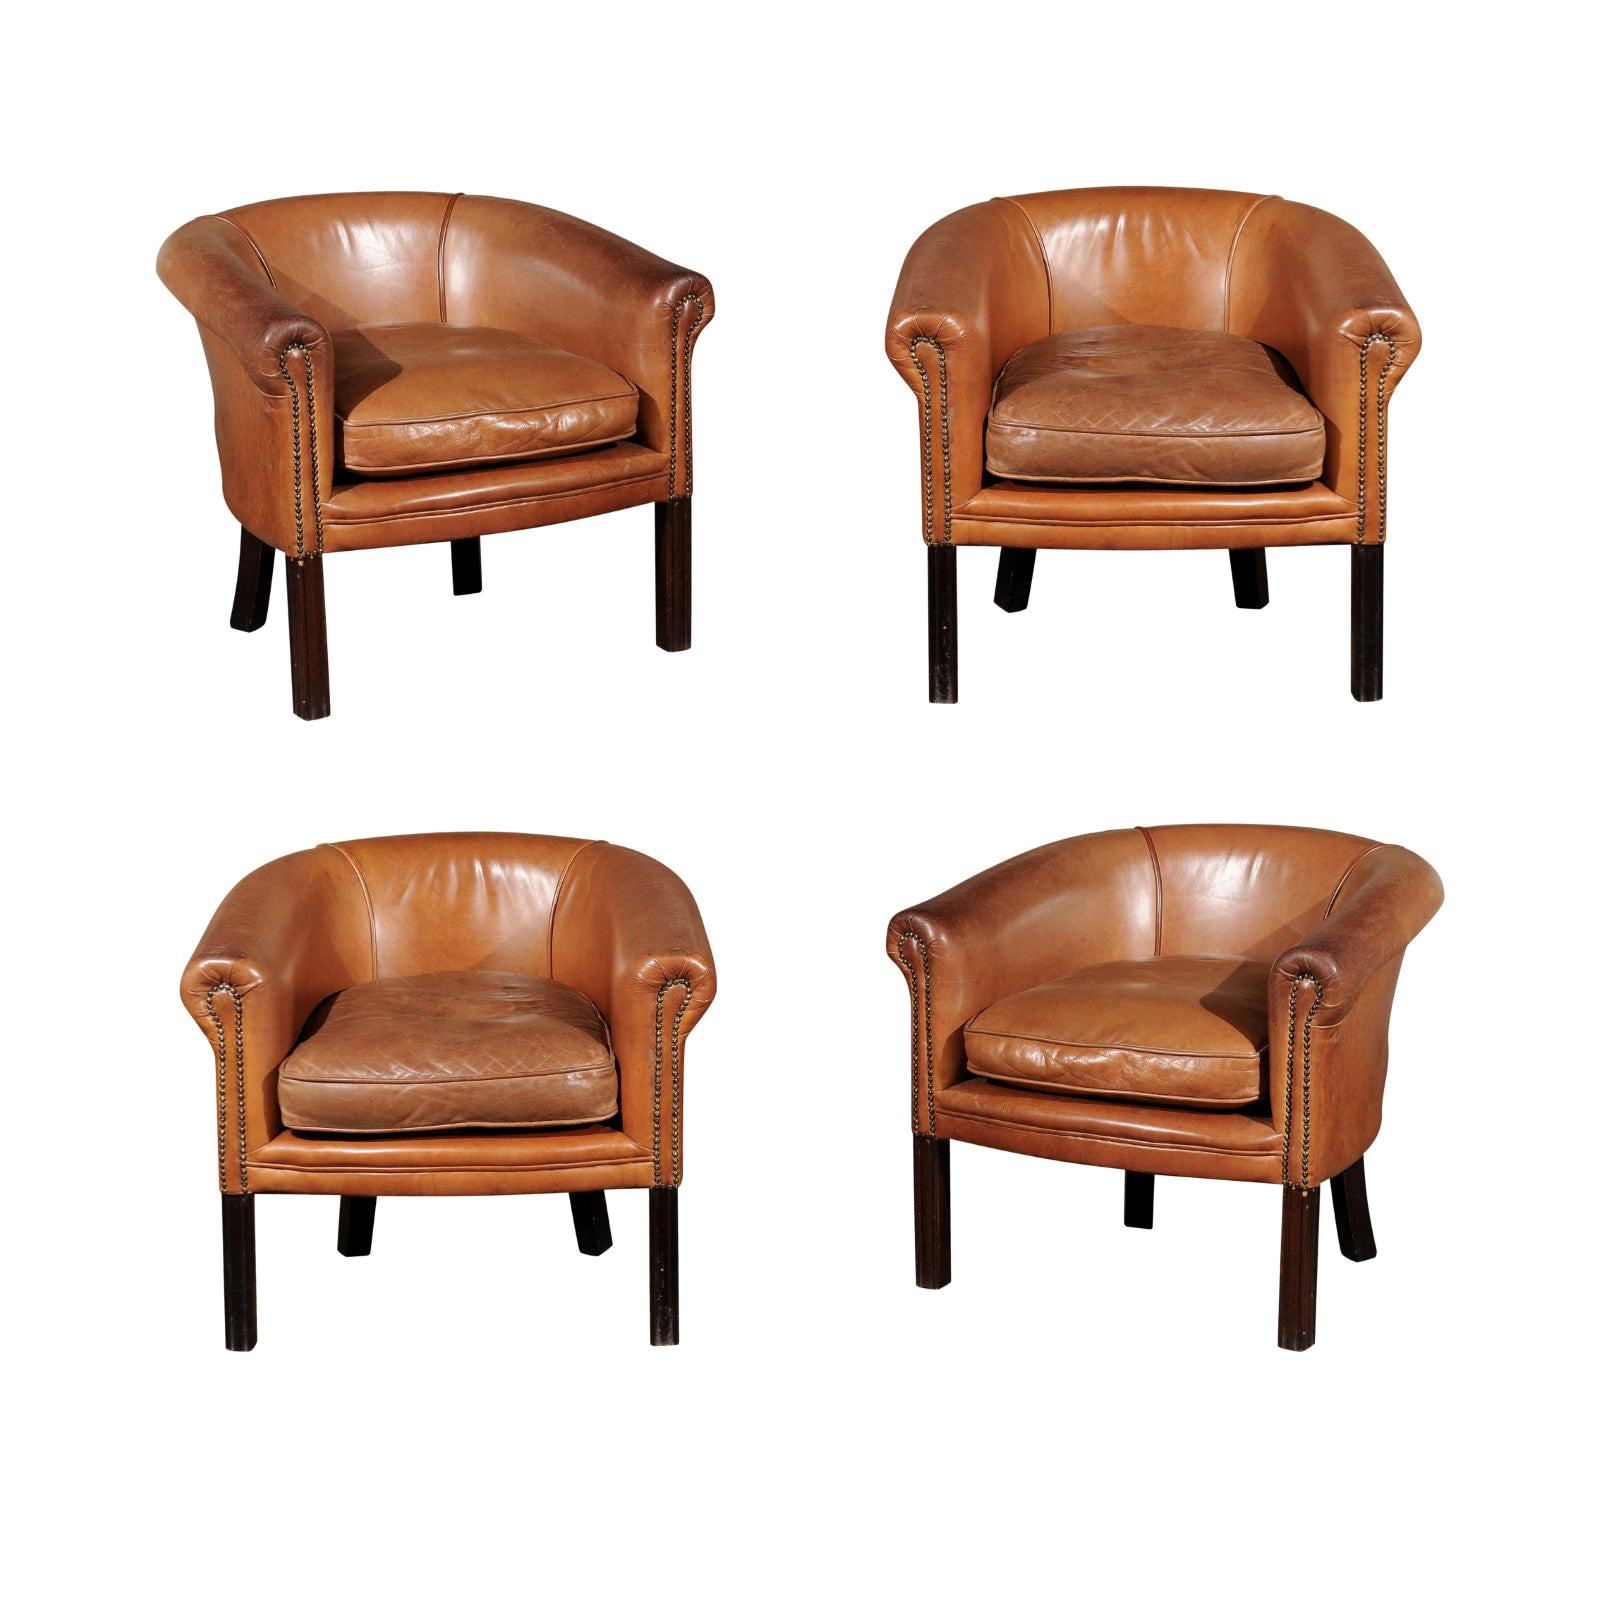 Pair of Italian Vintage Caramel Leather Club Chairs with Cushion and Nailheads